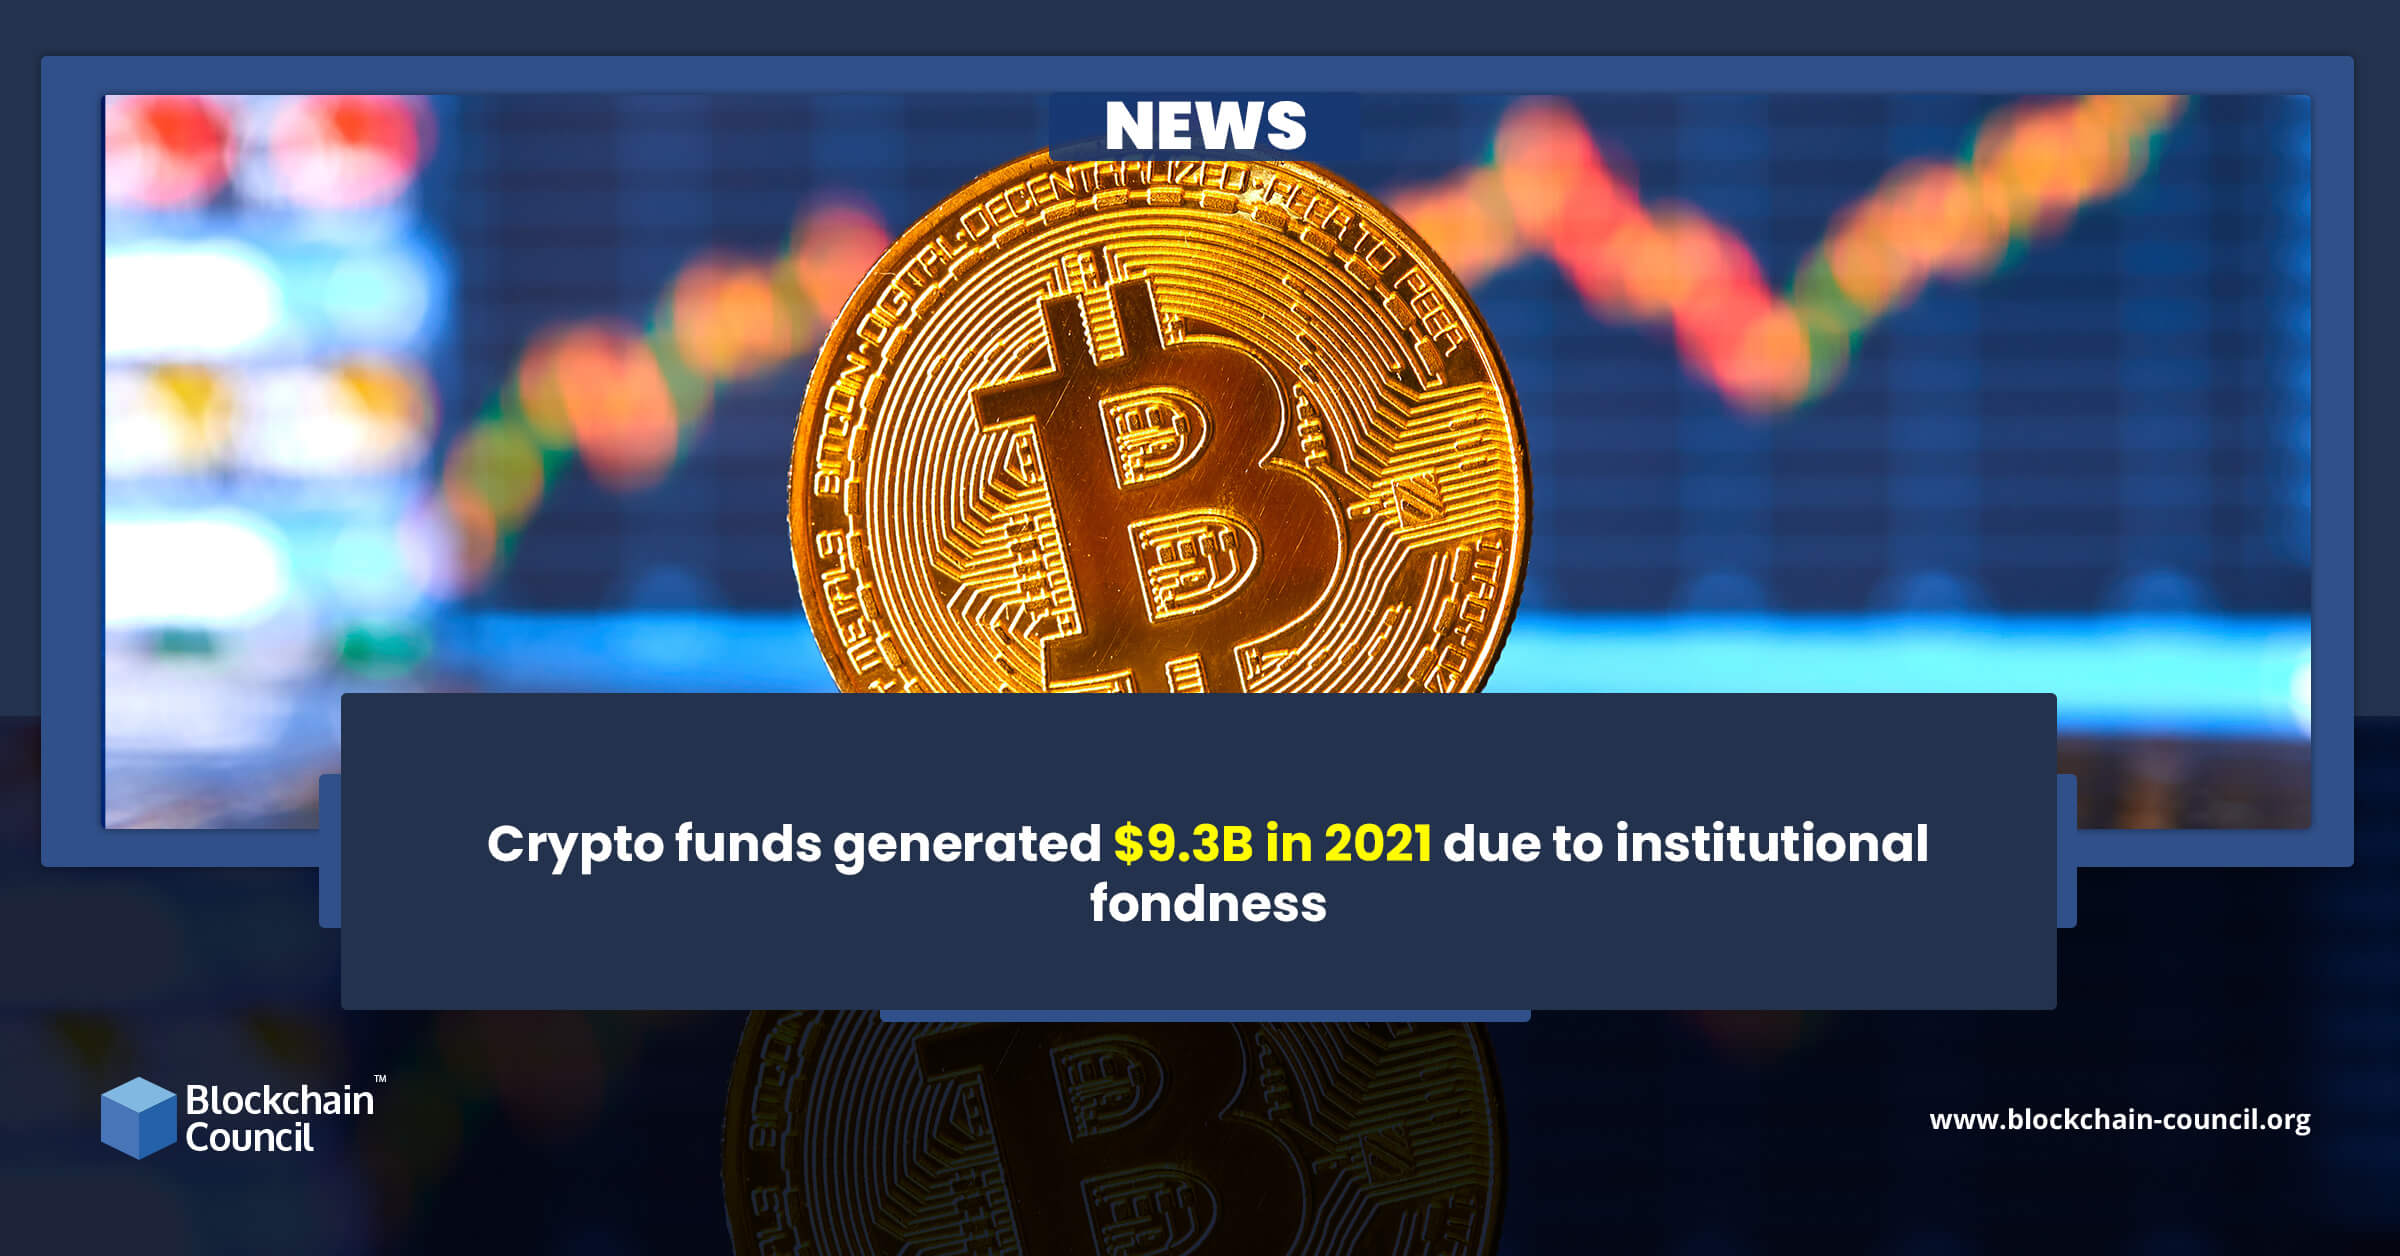 Crypto funds generated $9.3B in 2021 due to institutional fondness